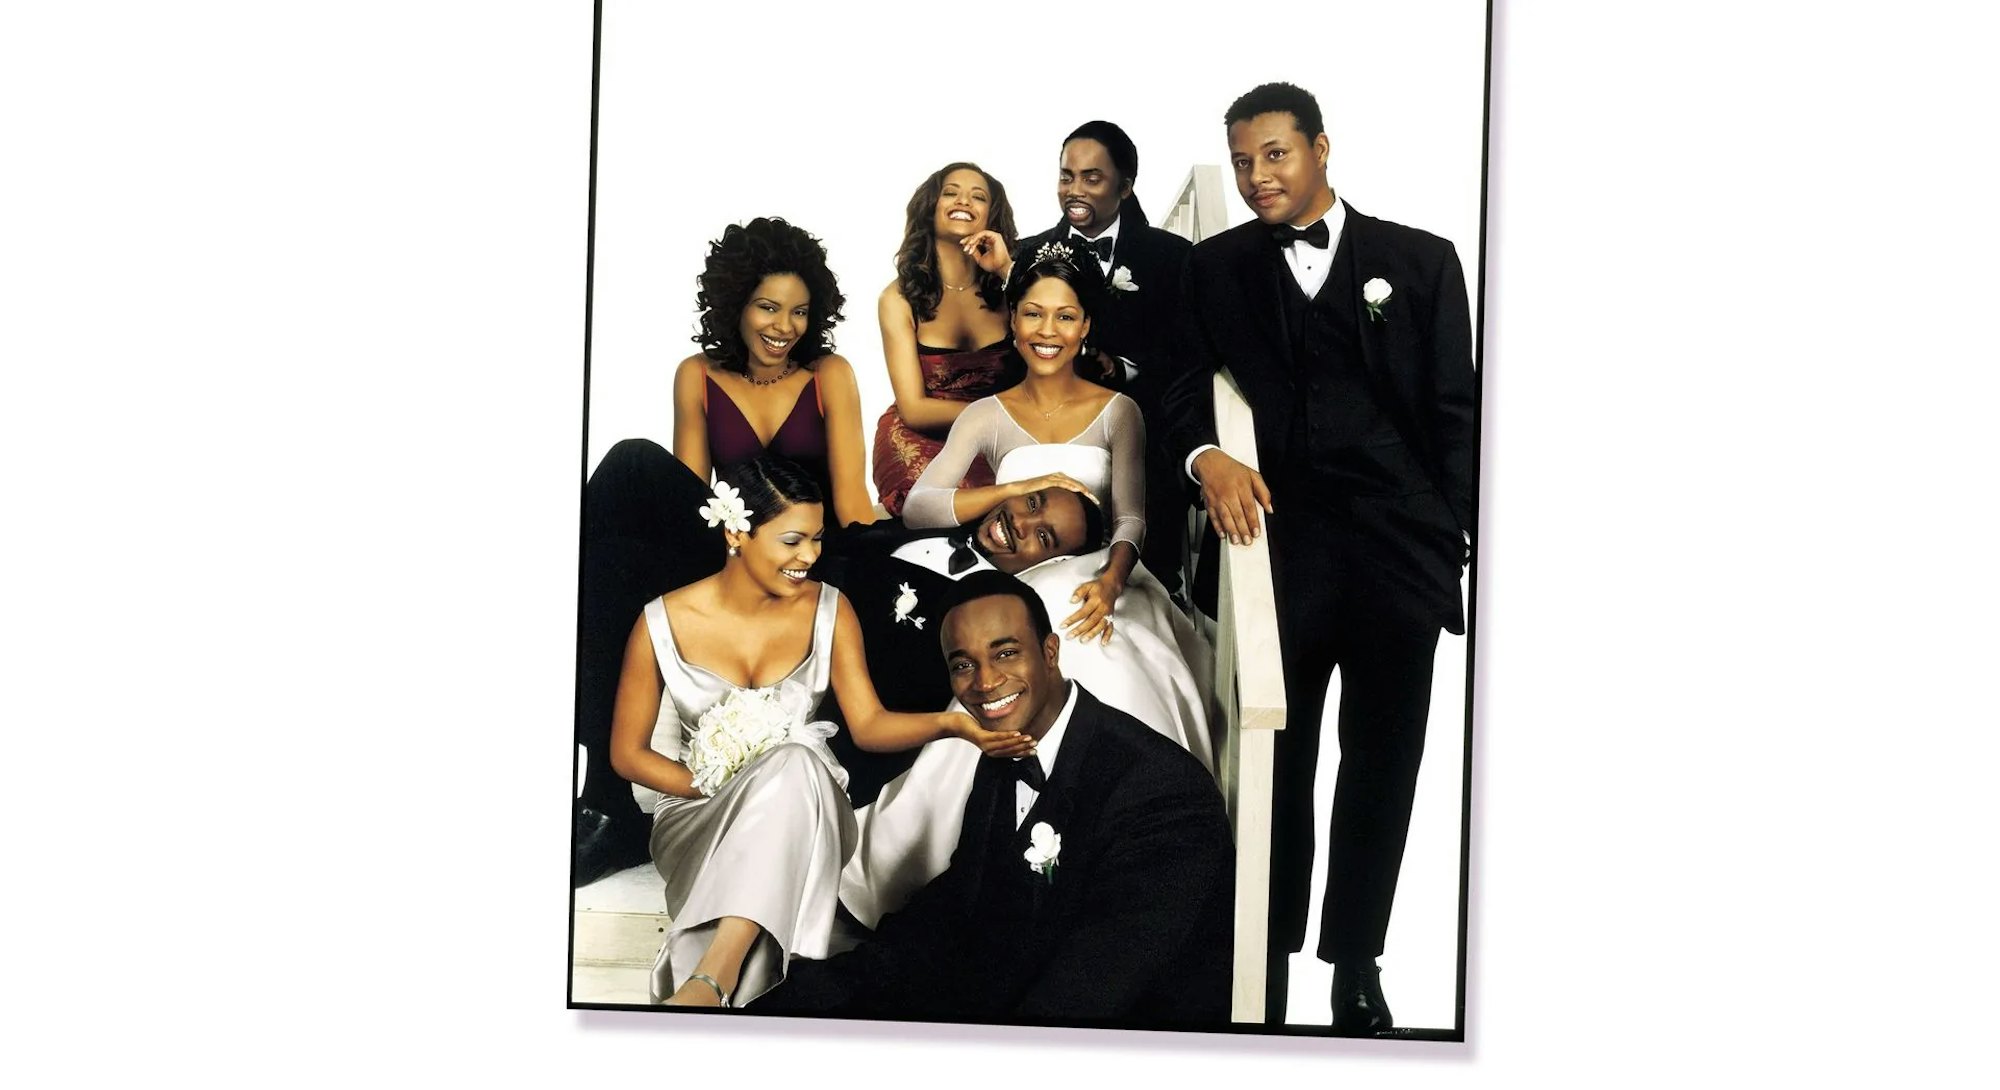 'The Best Man: The Final Chapters' arrives more than two decades after 'The Best Man' premiered in 1...